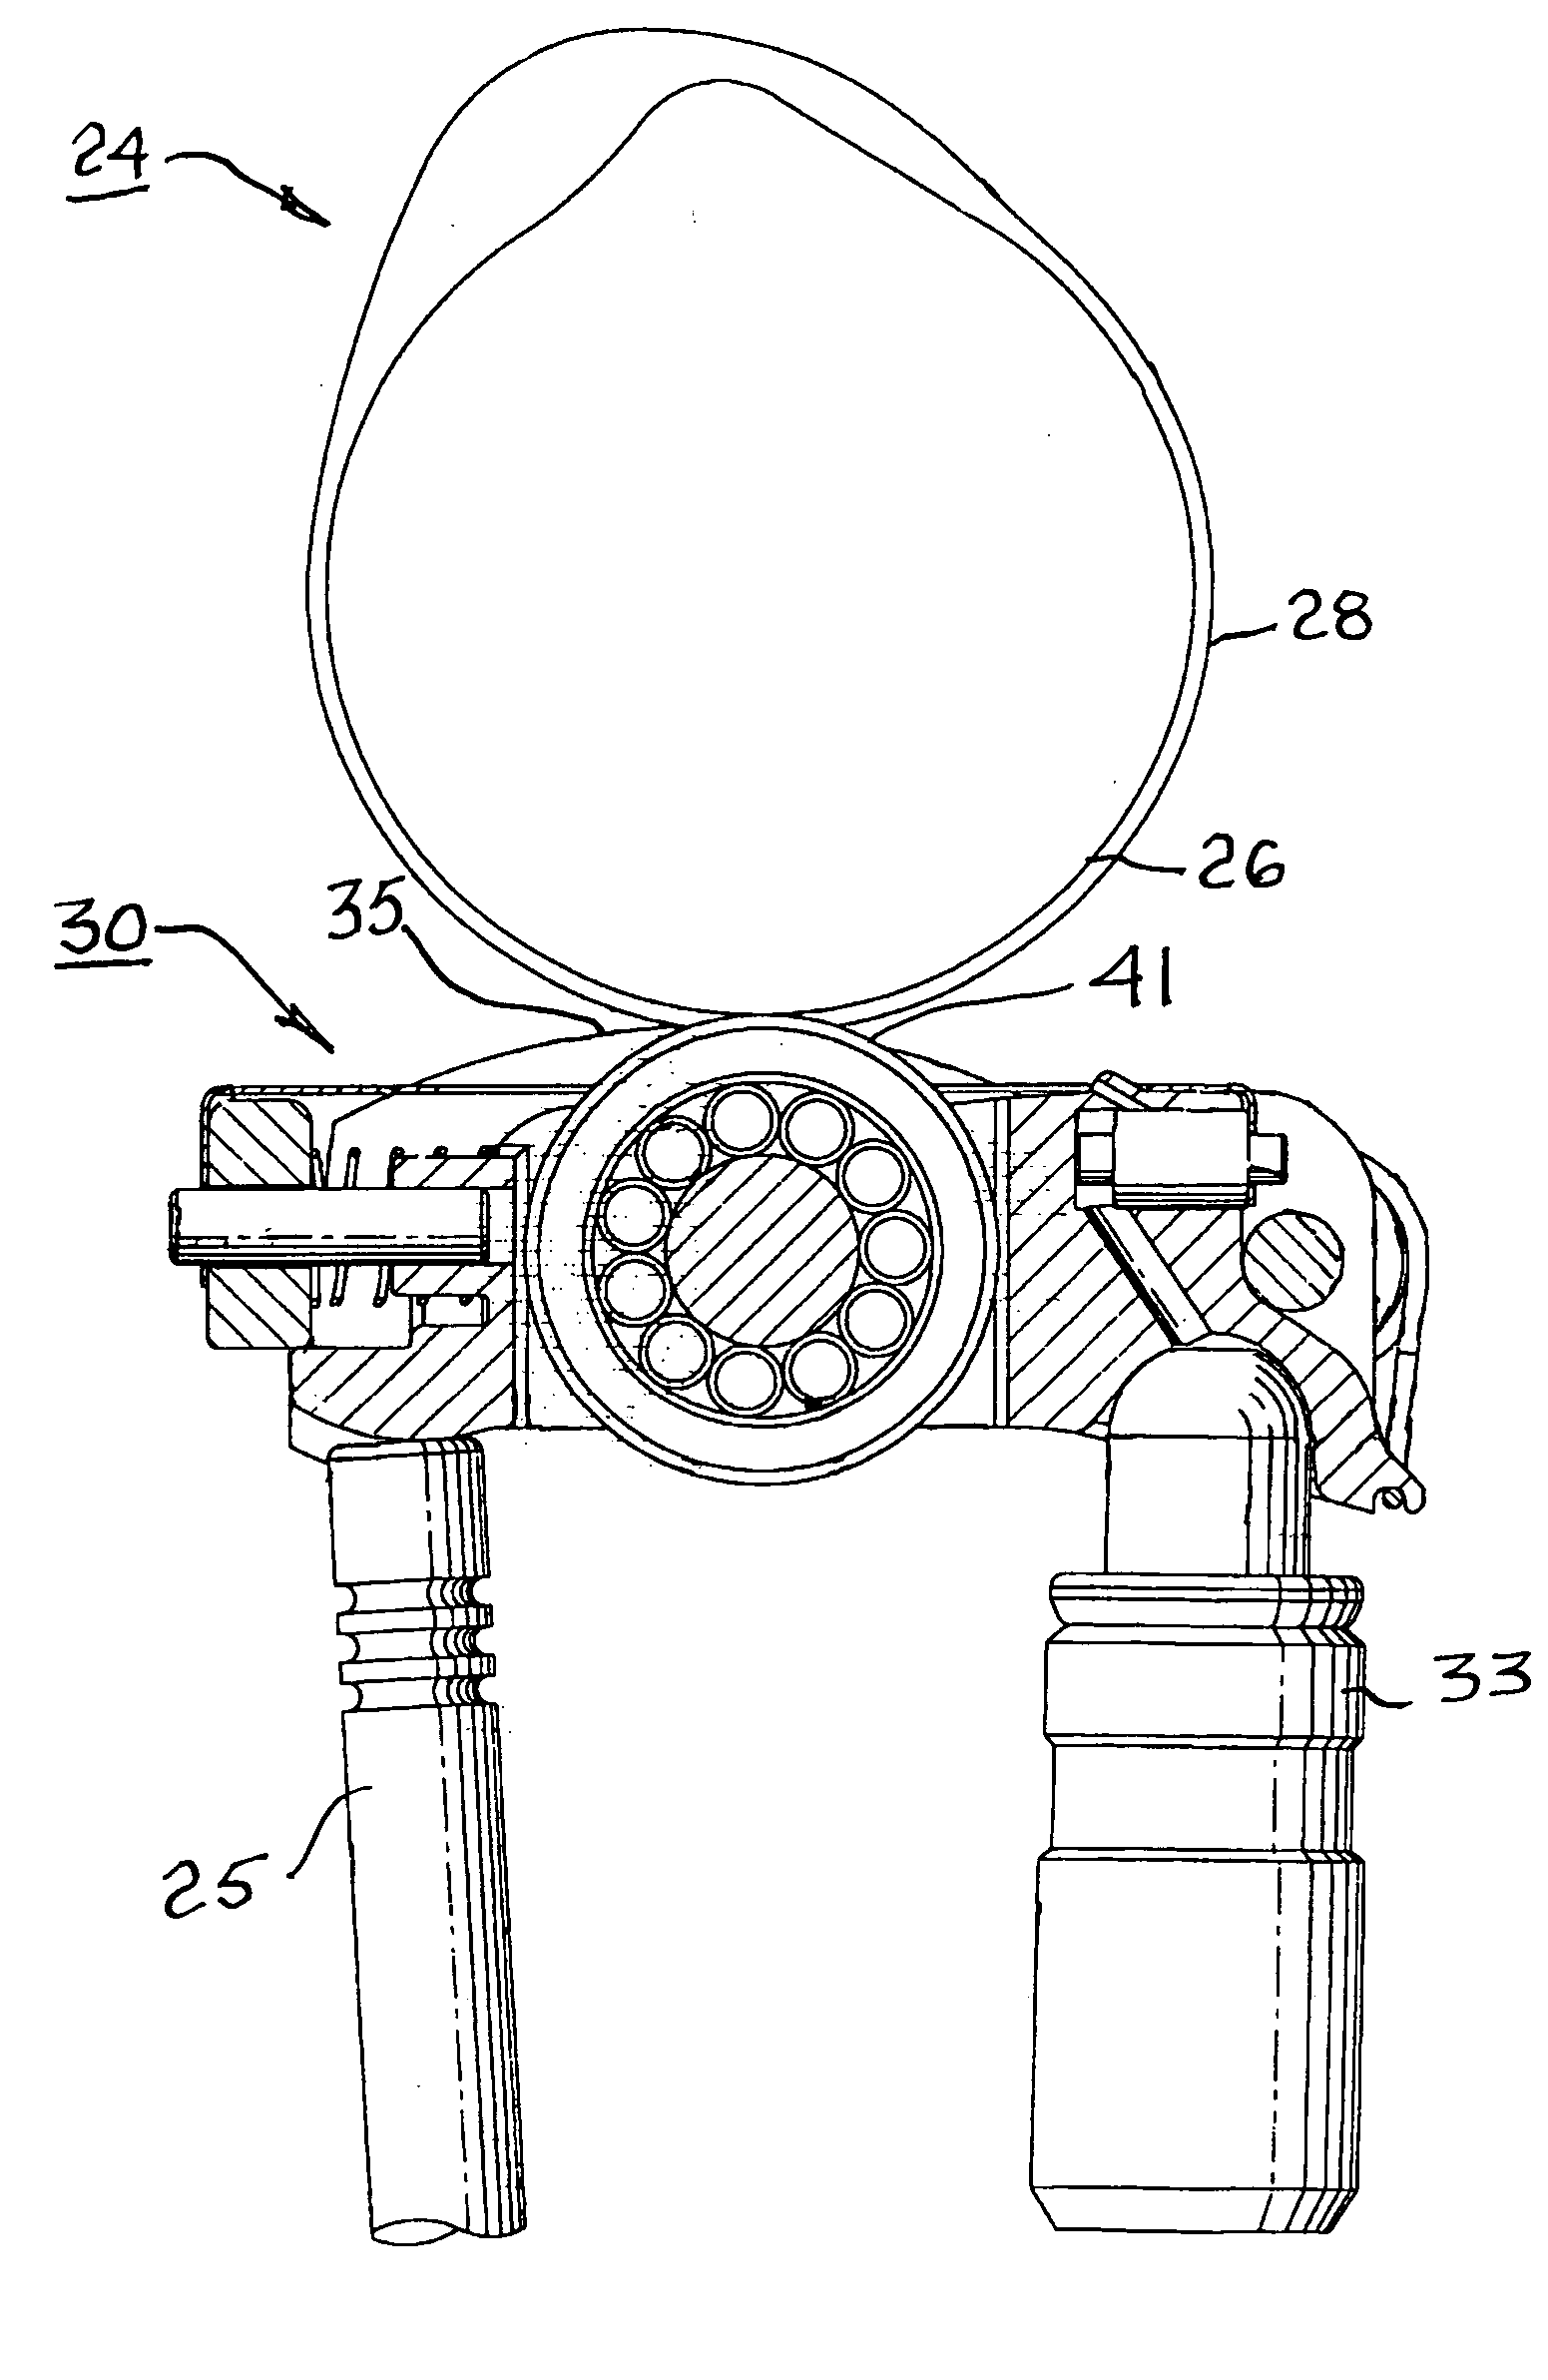 Method and apparatus for optimized combustion in an internal combustion engine utilizing homogeneous charge compression ignition and variable valve actuation